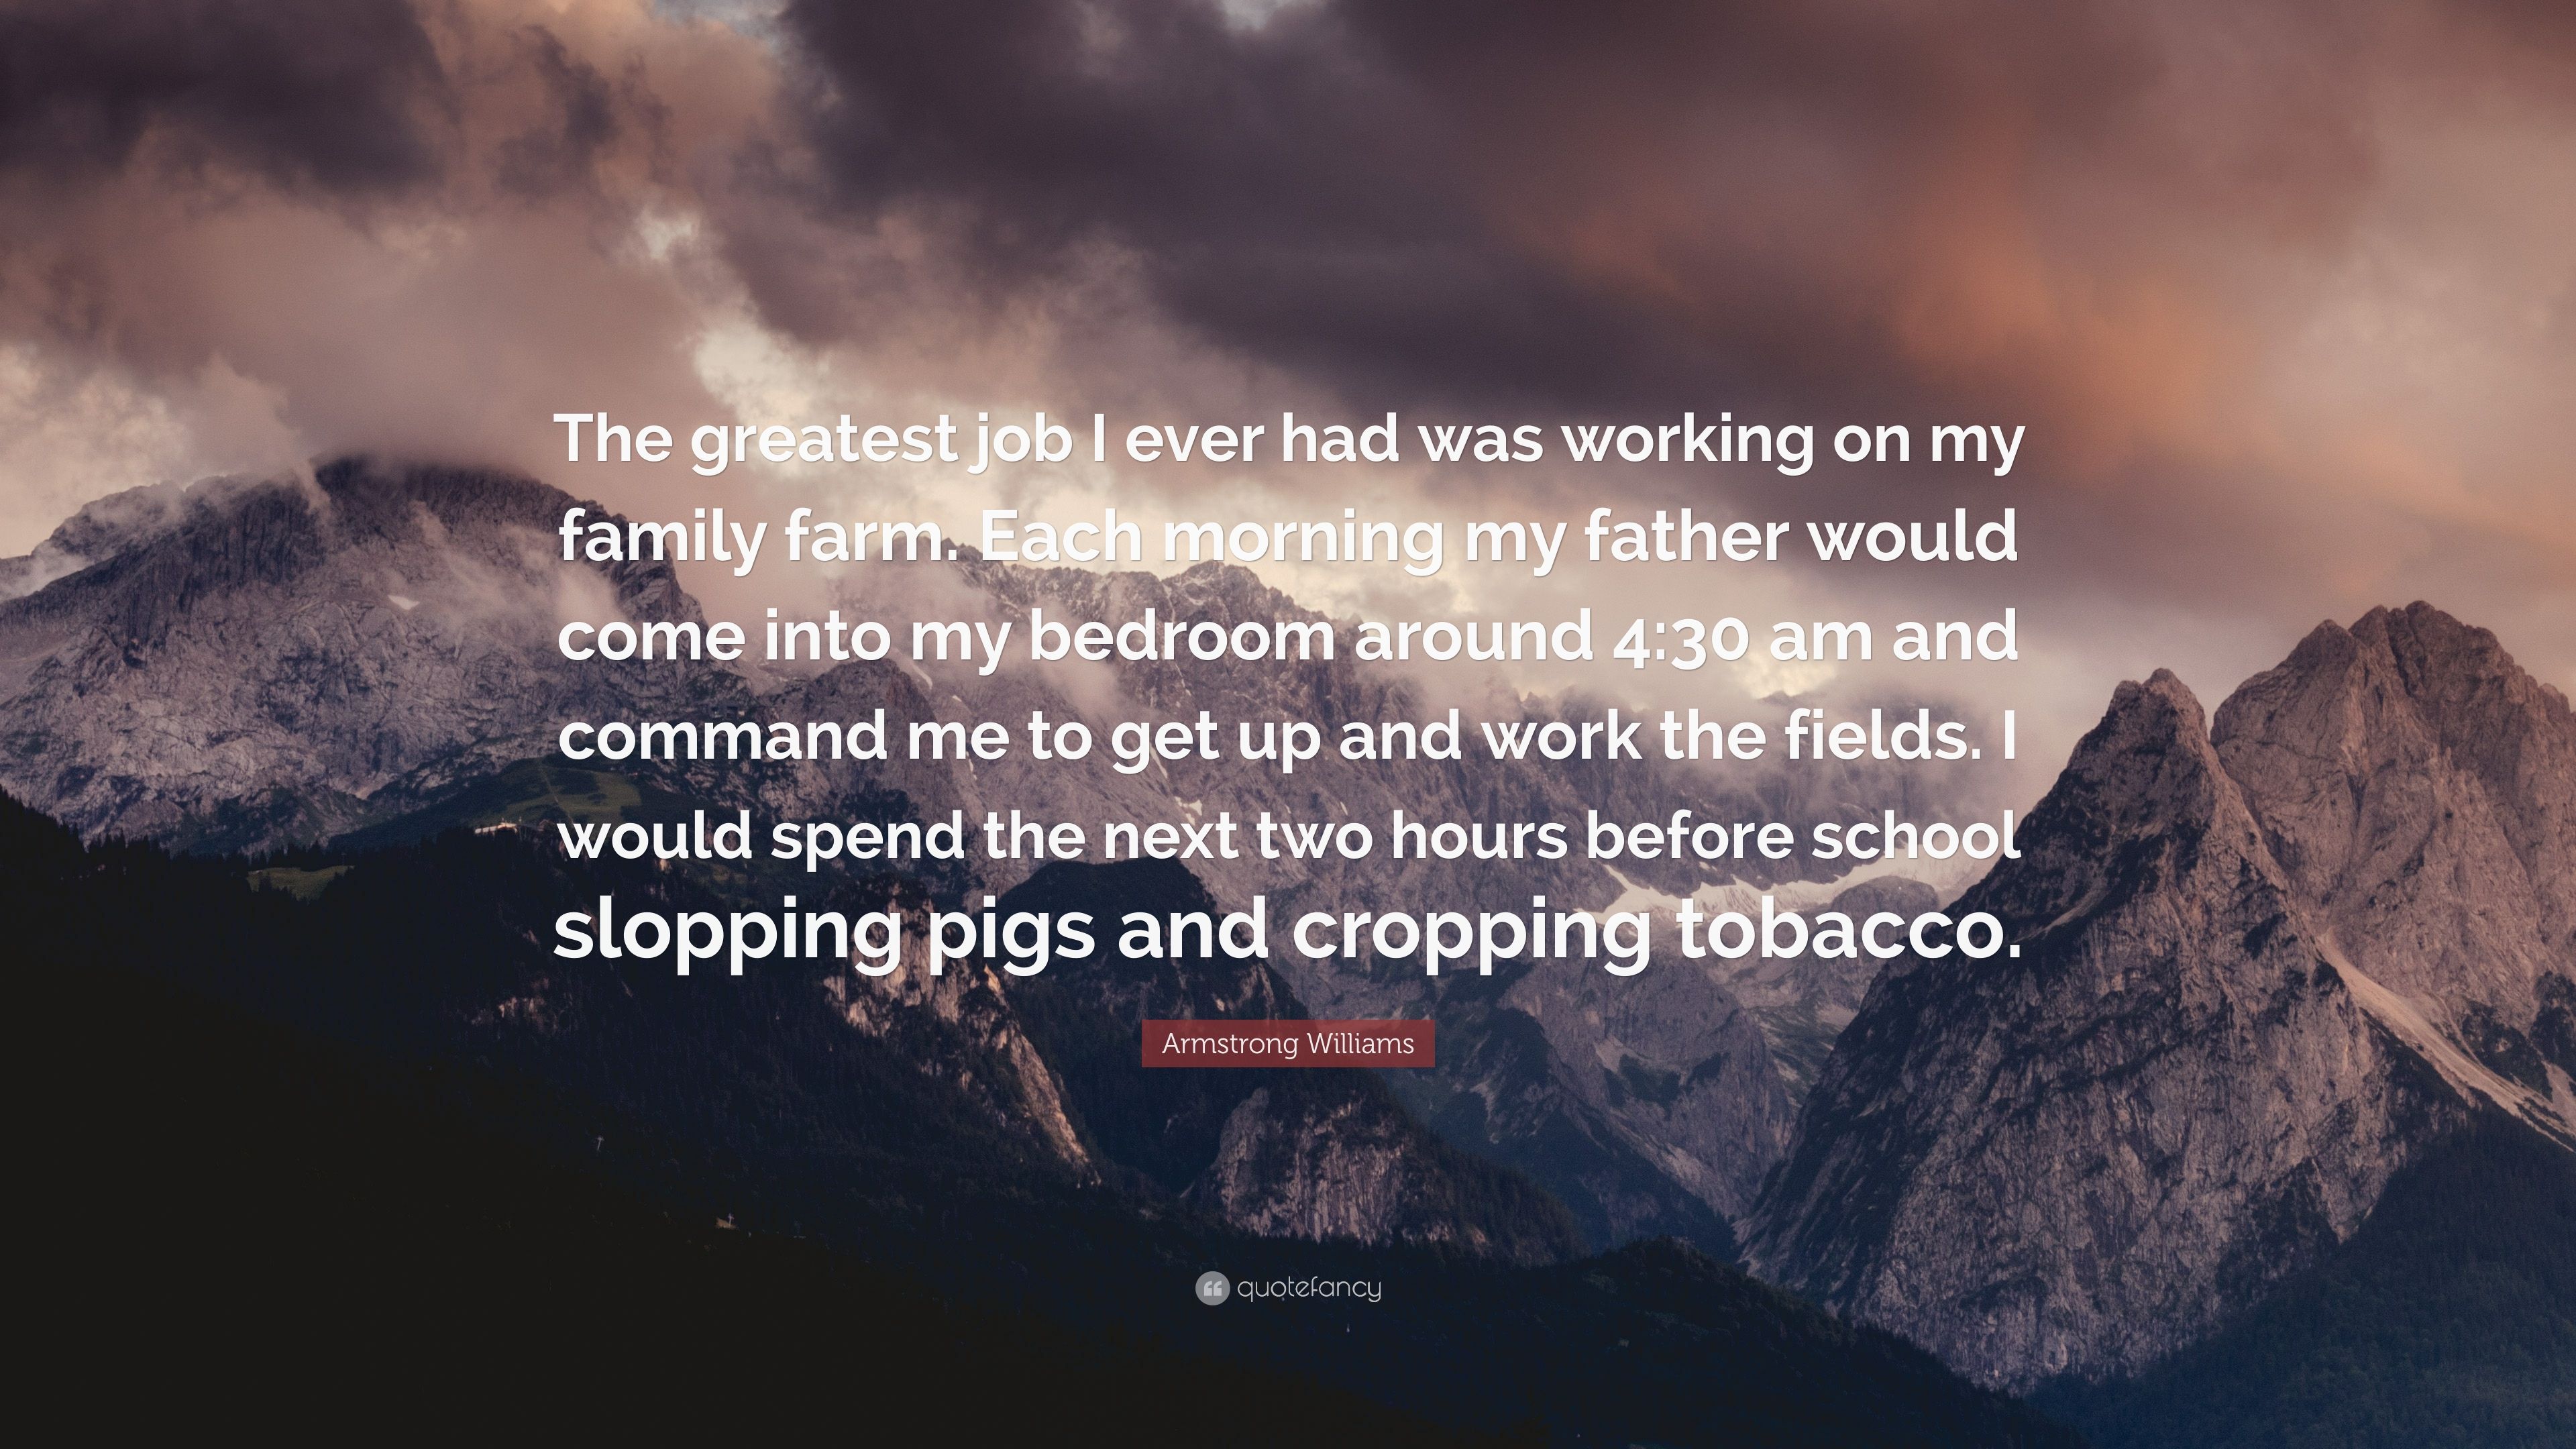 Armstrong Williams Quote: “The greatest job I ever had was working on my family farm. Each morning my father would come into my bedroom around 4:30.” (7 wallpaper)